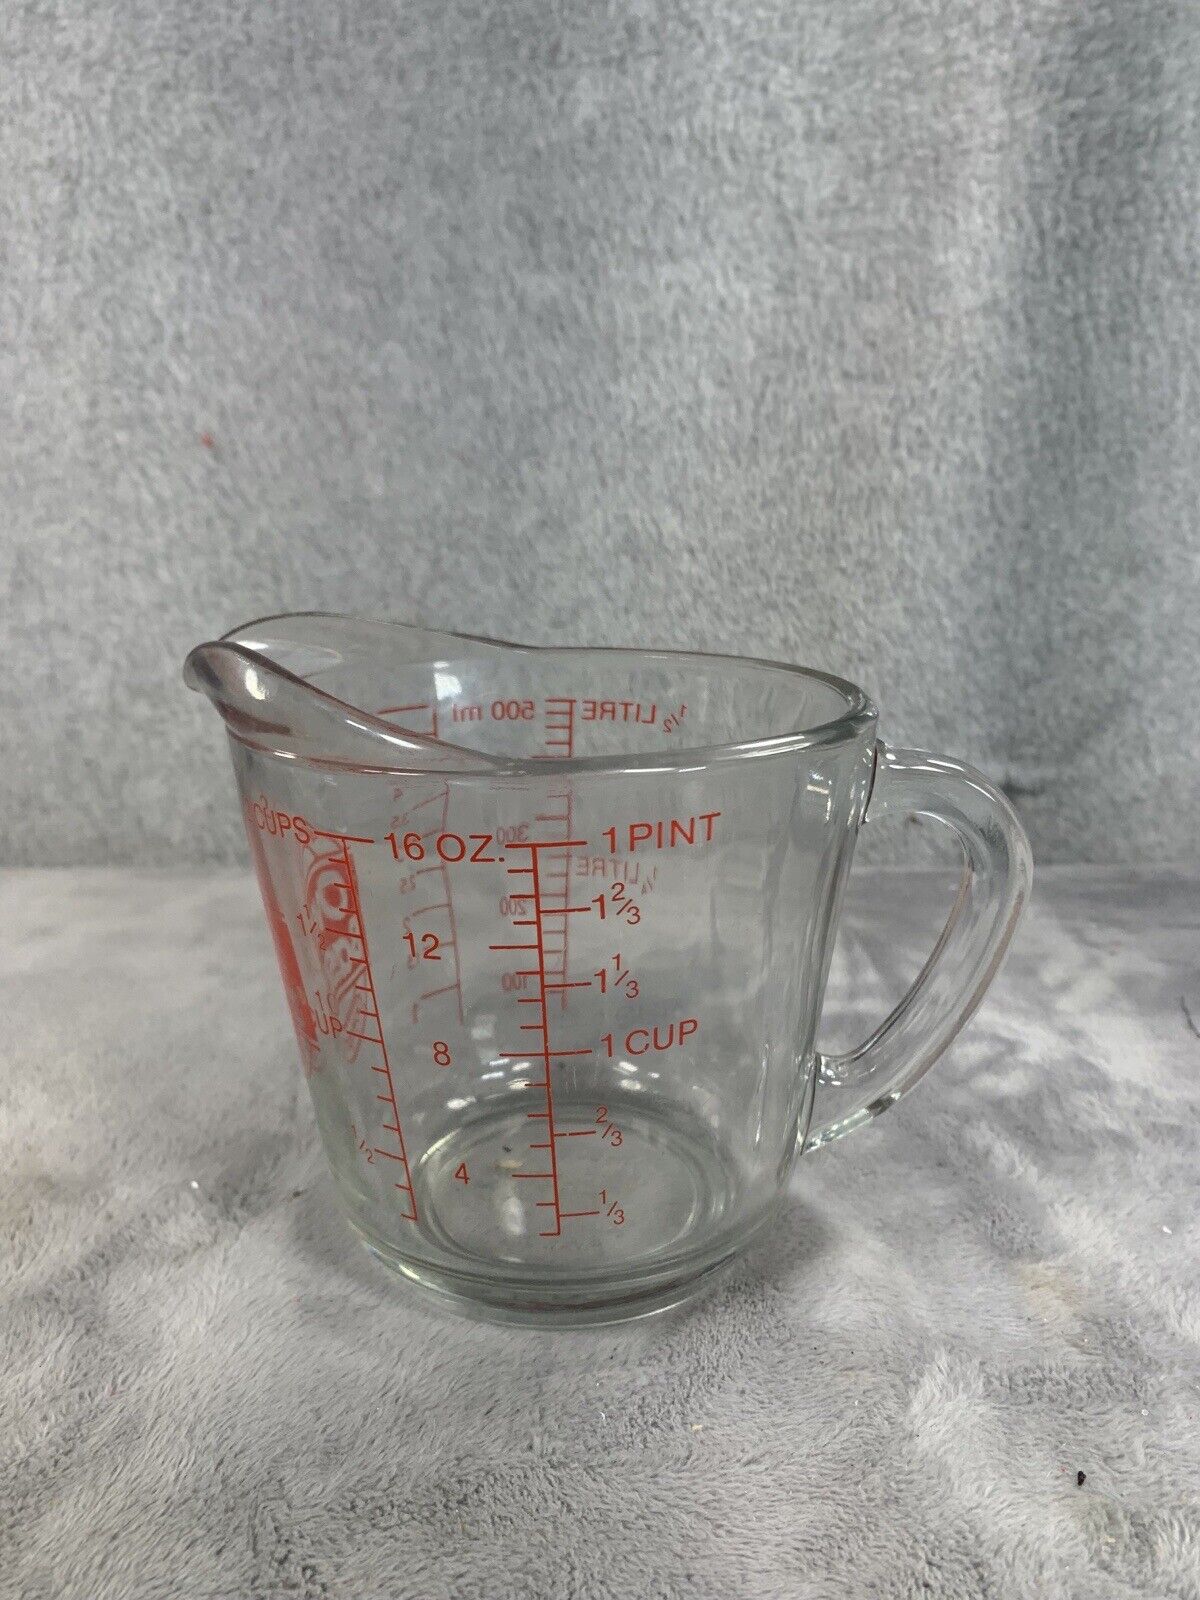 Anchor Hocking Oven Basics 2 Cup Glass Measuring Cup No. 498 Vintage Measuring